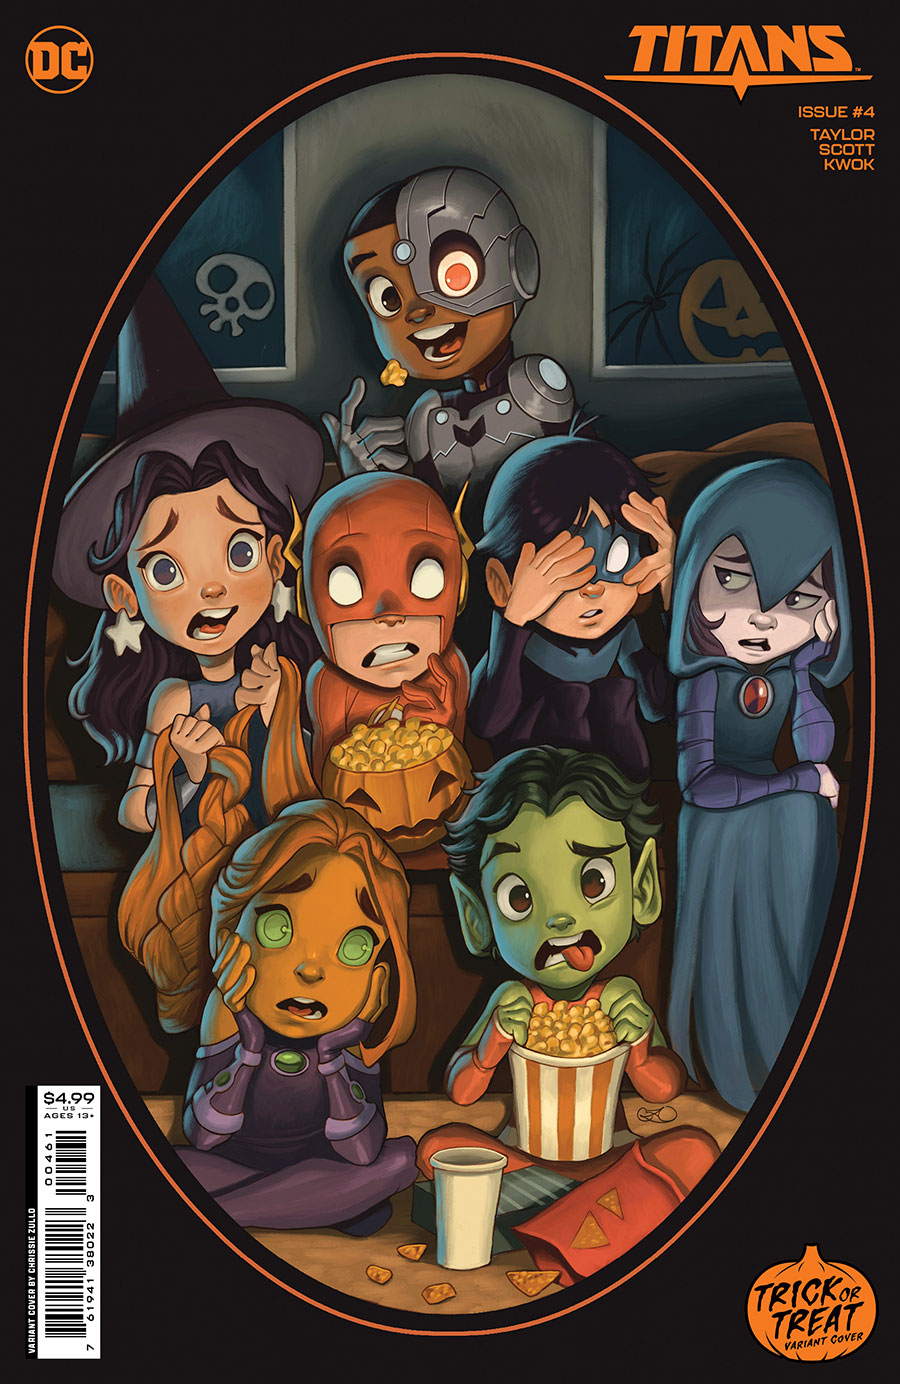 Titans Vol 4 #4 Cover D Variant Chrissie Zullo Trick Or Treat Card Stock Cover (Limit 1 Per Customer)